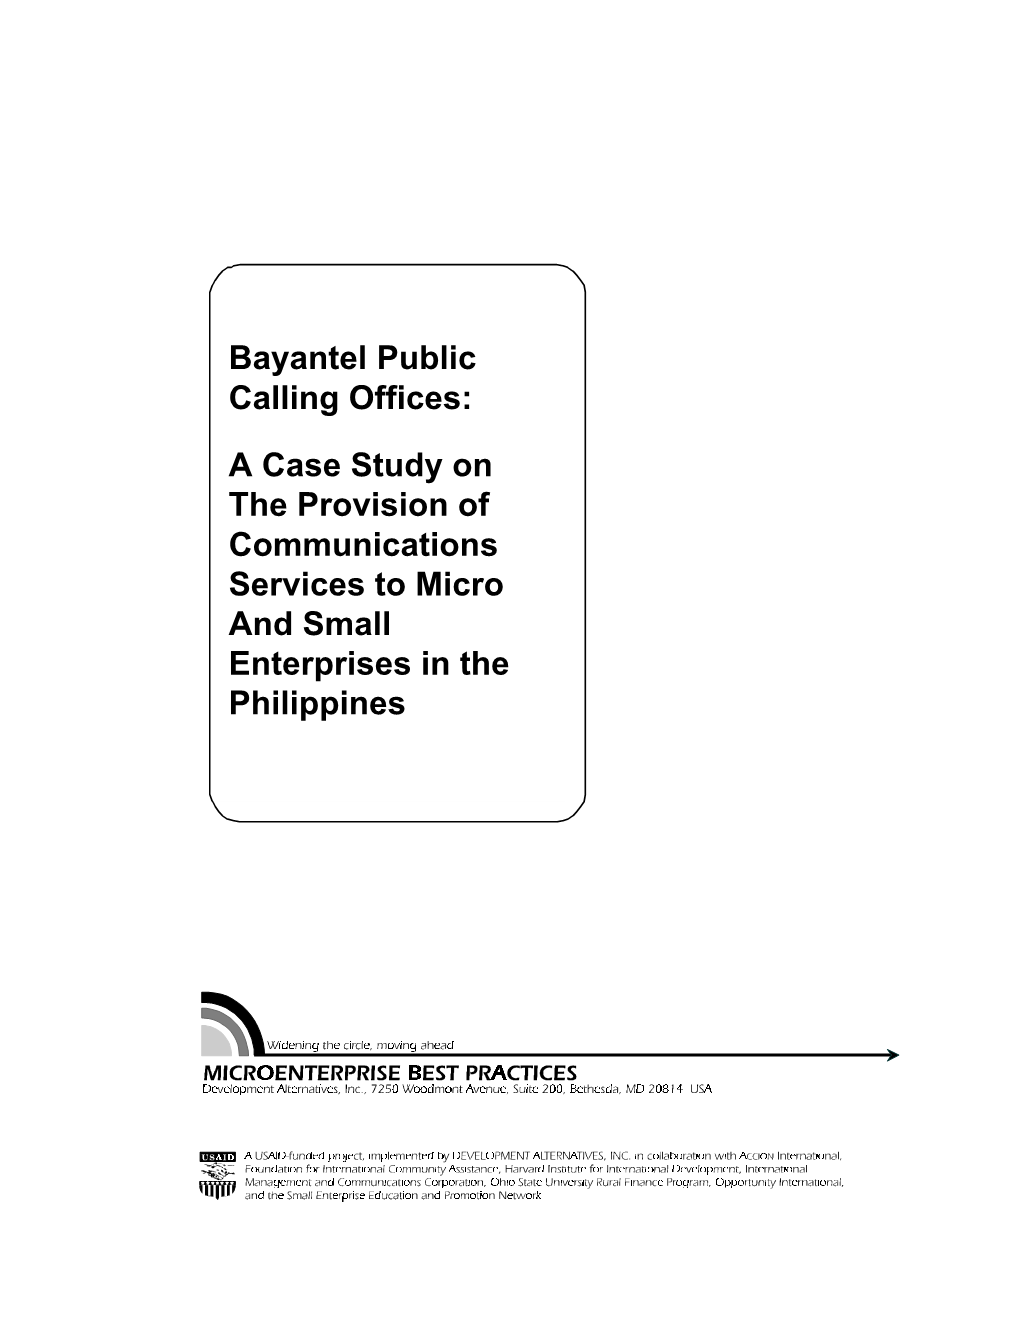 Bayantel Public Calling Offices: a Case Study on the Provision of Communications Services to Micro and Small Enterprises in the Philippines